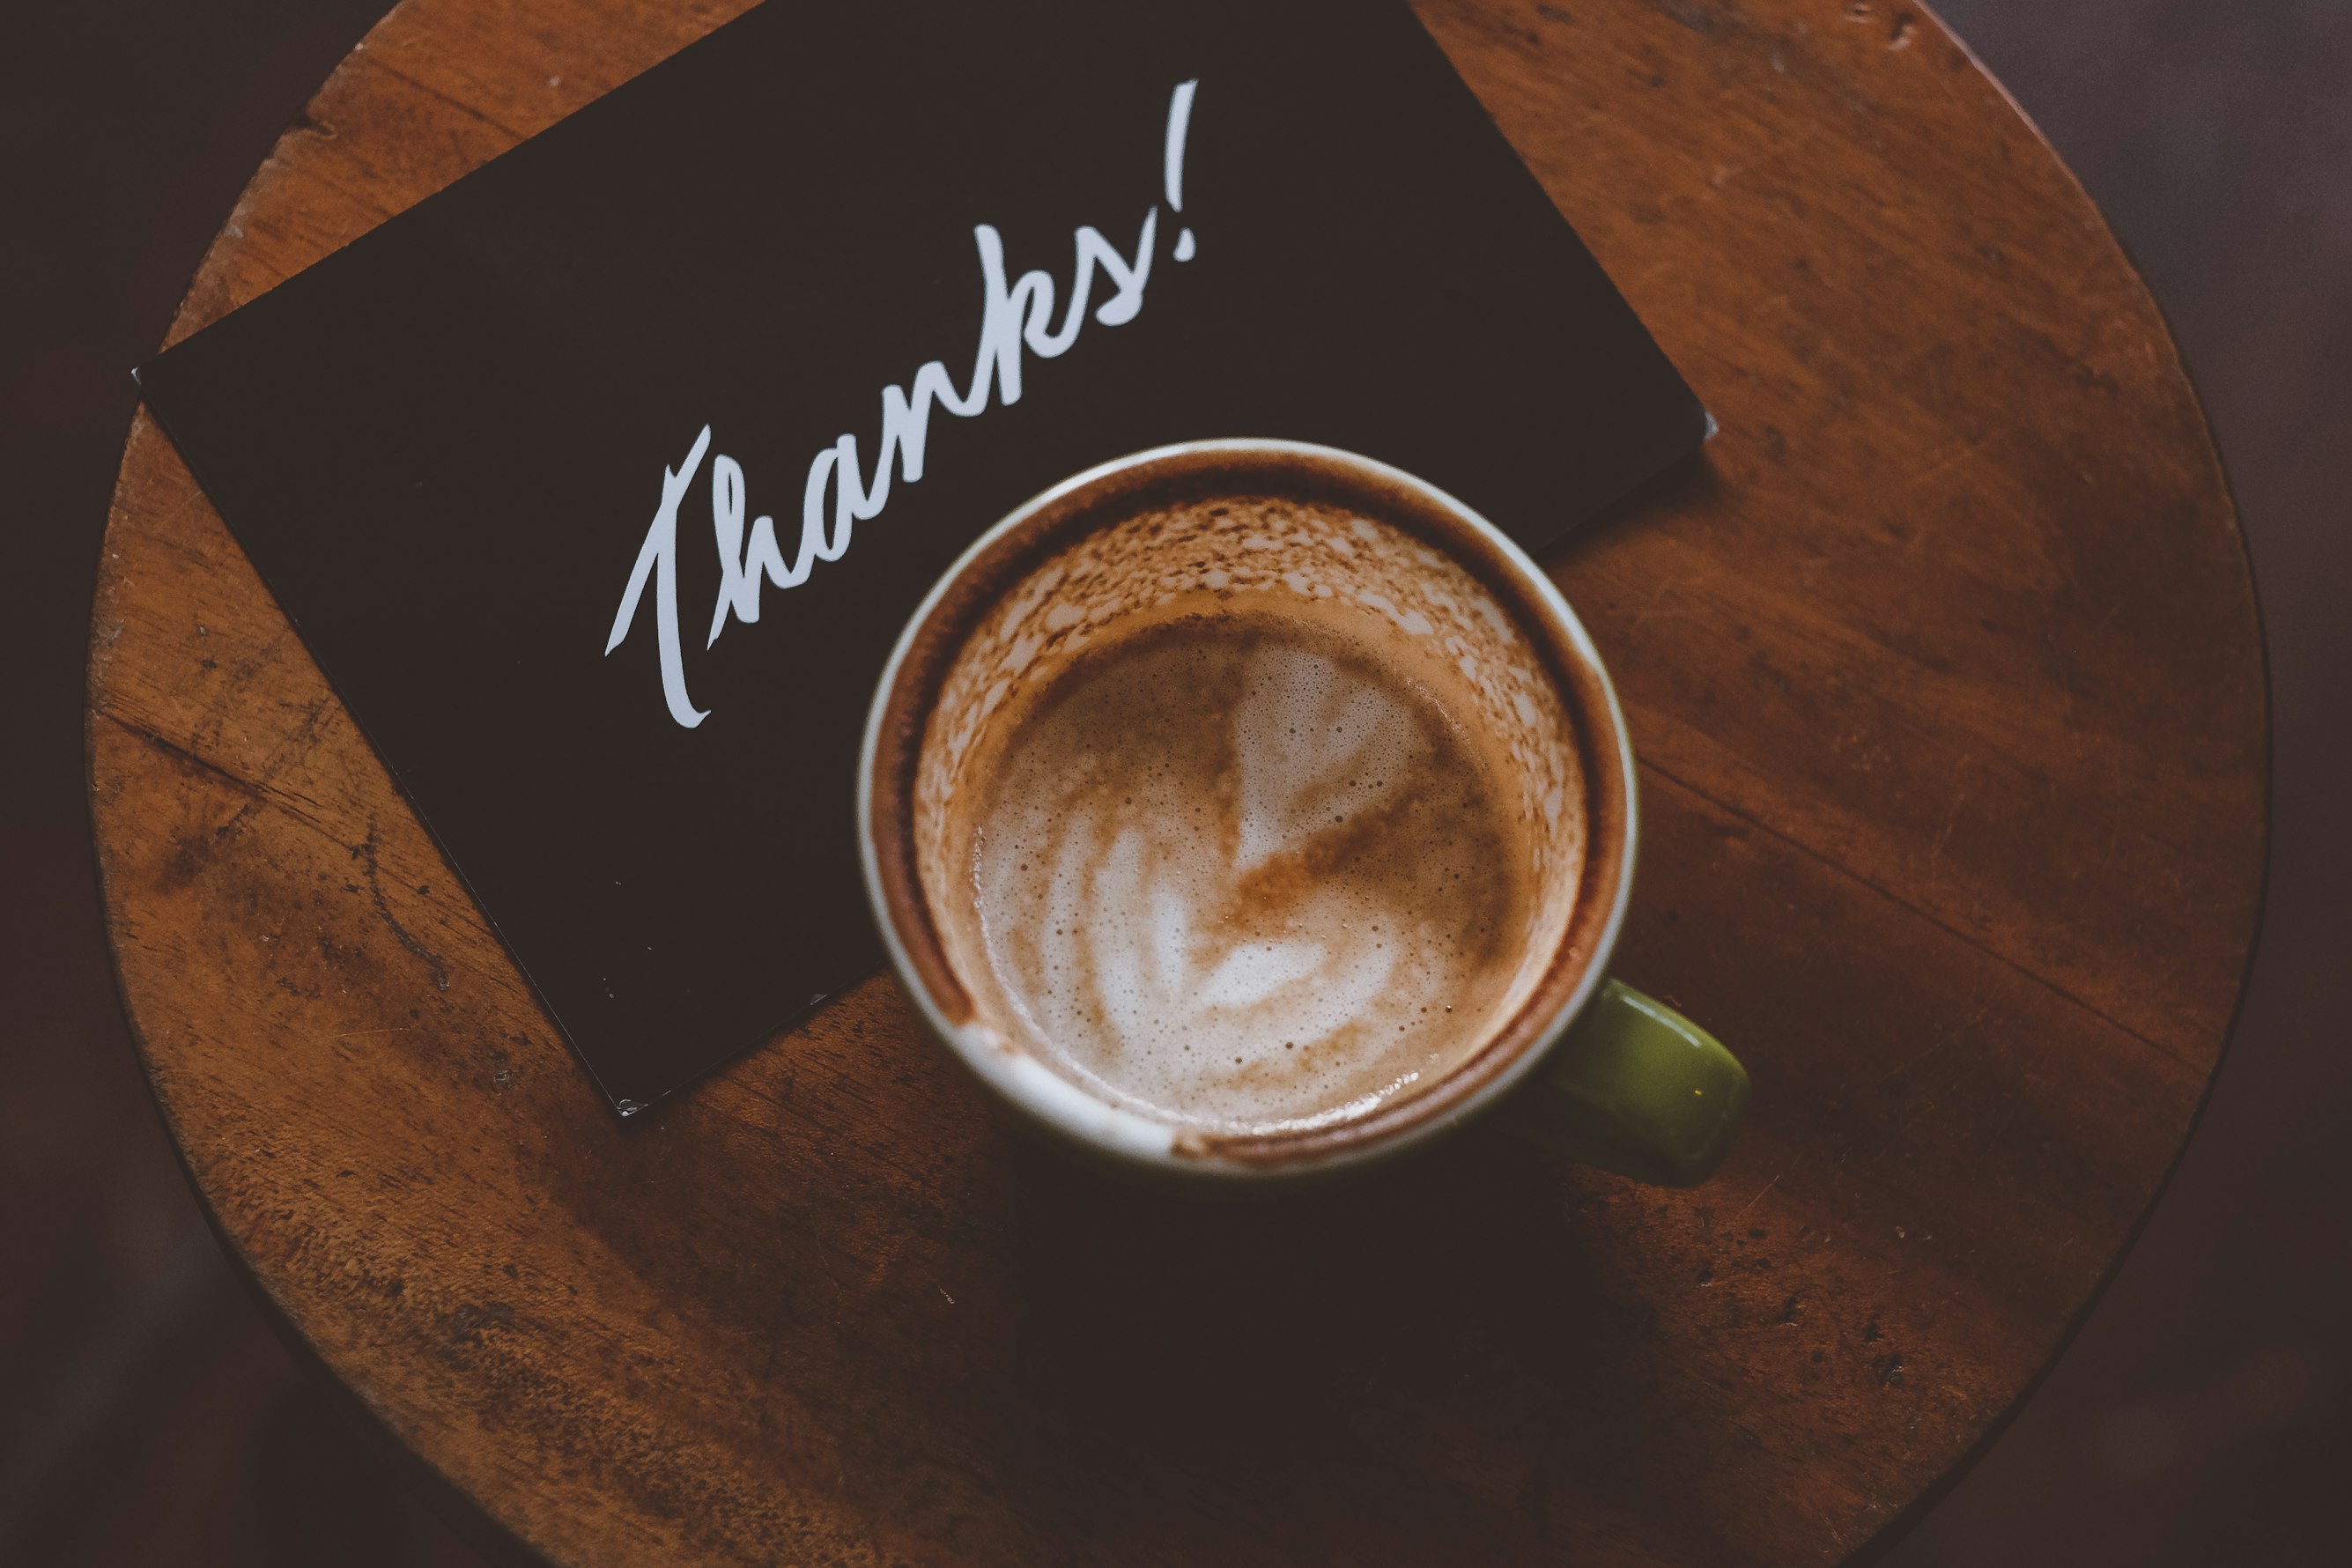 Thank You by Photo by Hanny Naibaho on Unsplash